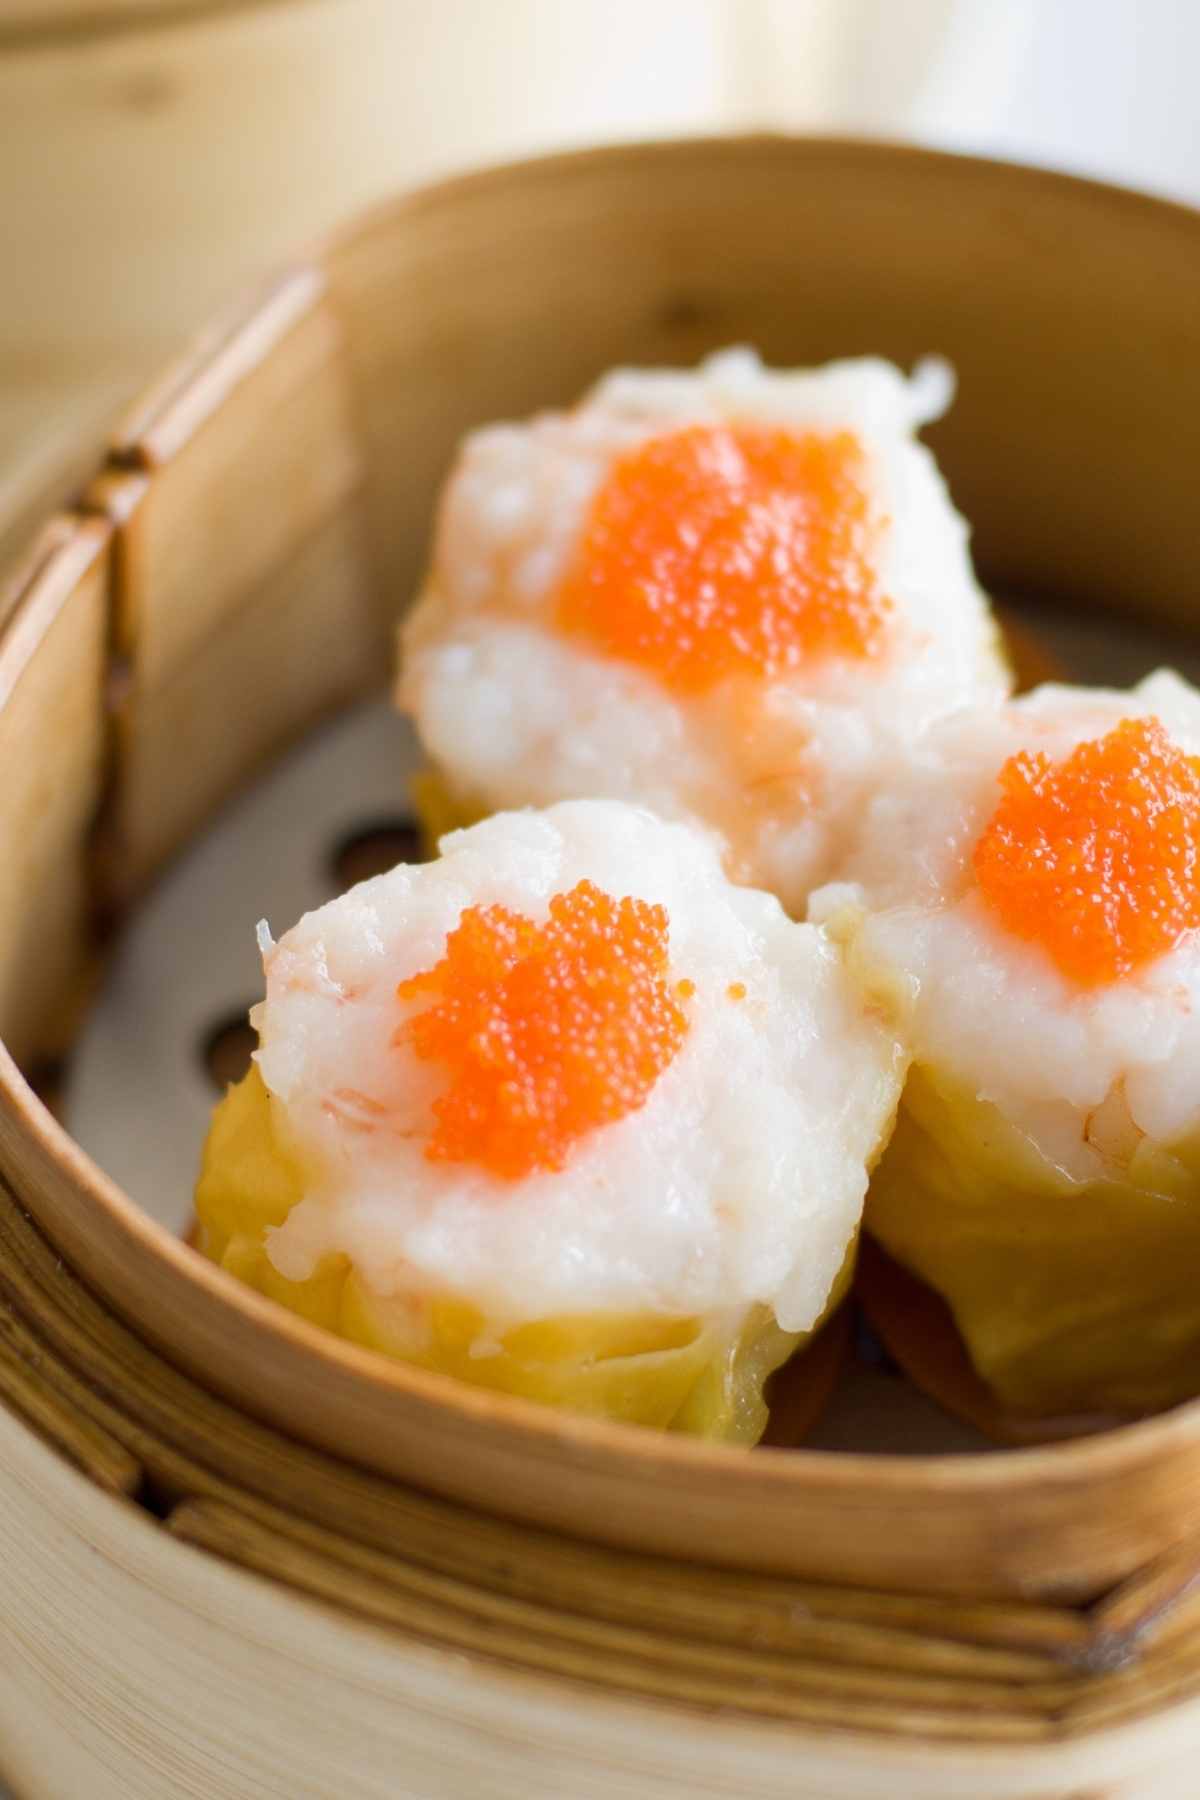 One of the most popular dim sum dishes is shumai or siu mai. It’s traditionally made with steamed pork and is a bite-sized treat that’s full of flavor.